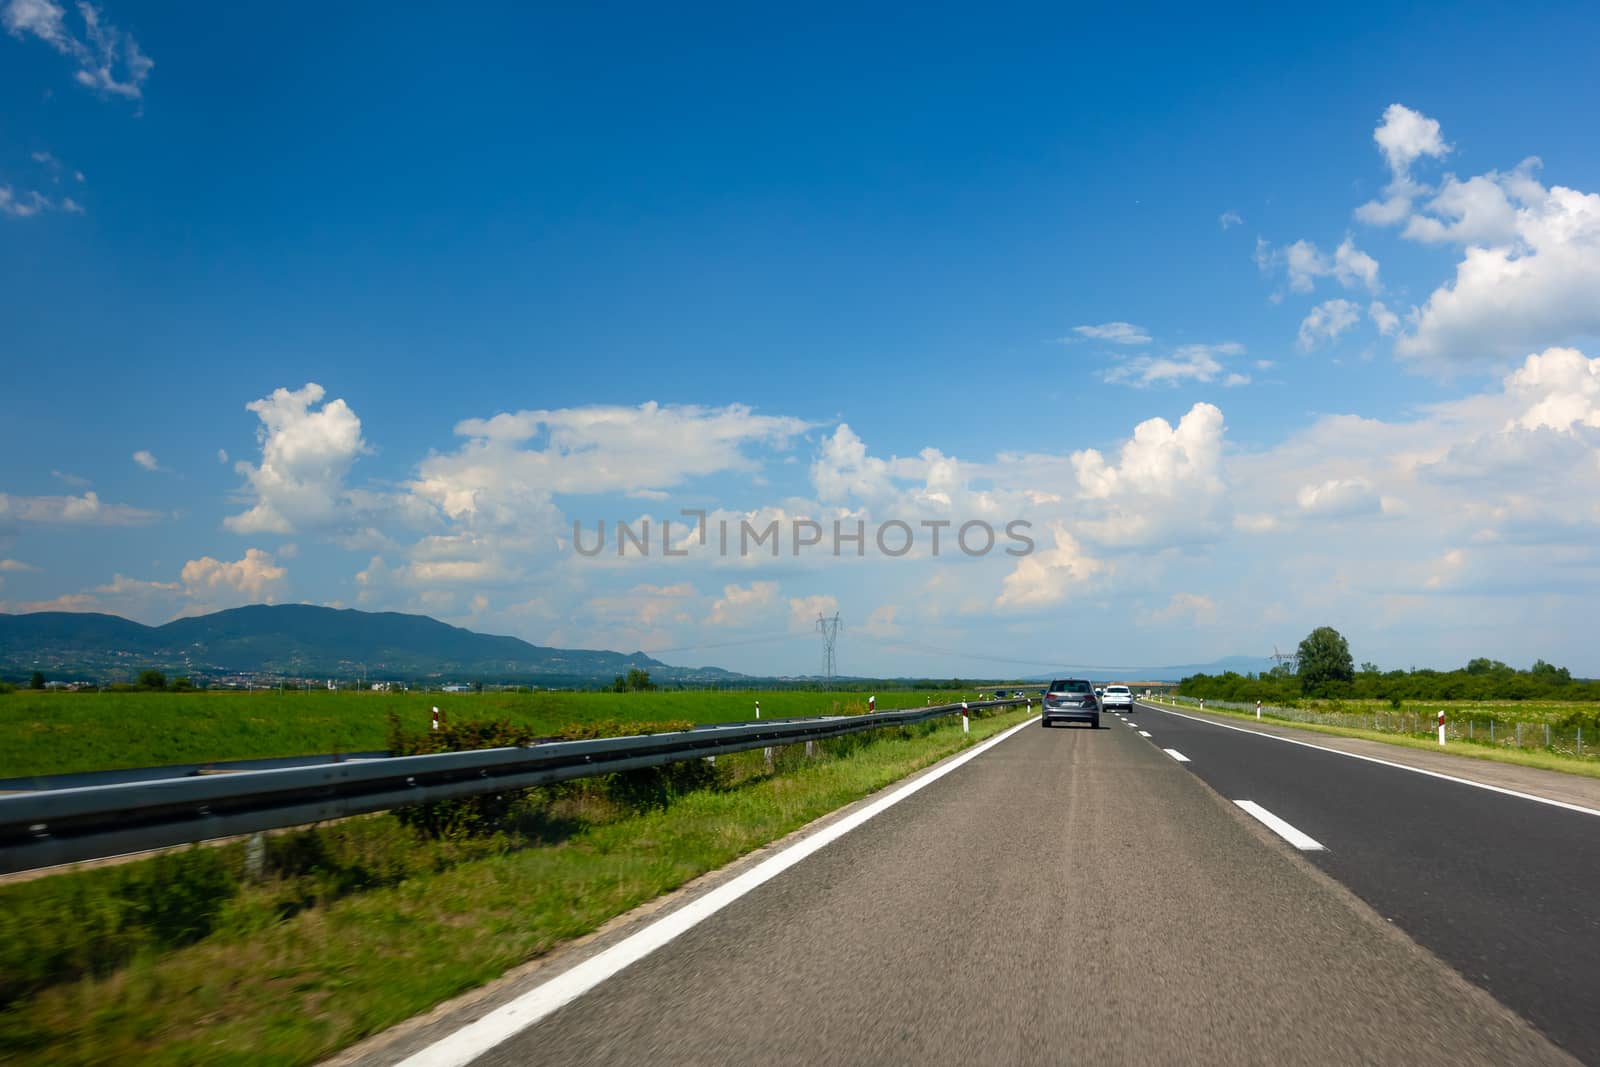 Highway in Croatia with mountains in the background by asafaric